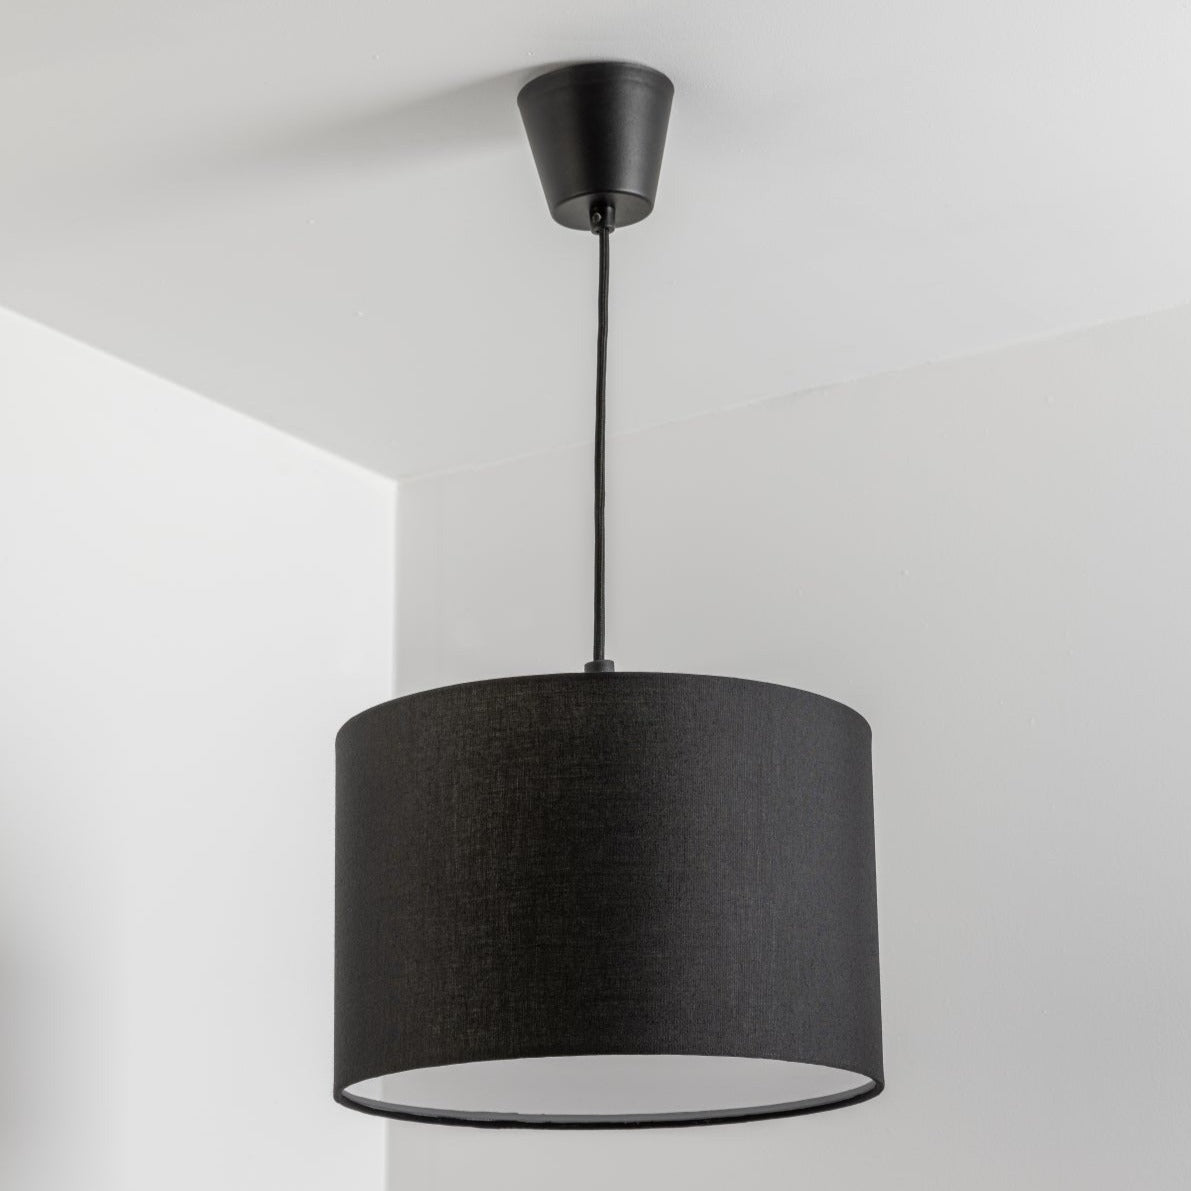 The Lucia is a modern cylinder drum shaped lamp shade in a luxury cotton finish and white opal diffuser, which cleverly enhances the room instantly when illuminated providing a uniform light. This fantastic shade can double up as either a ceiling pendant light shade or table lampshade. Easily fits to your standard ceiling light socket - no wiring required.